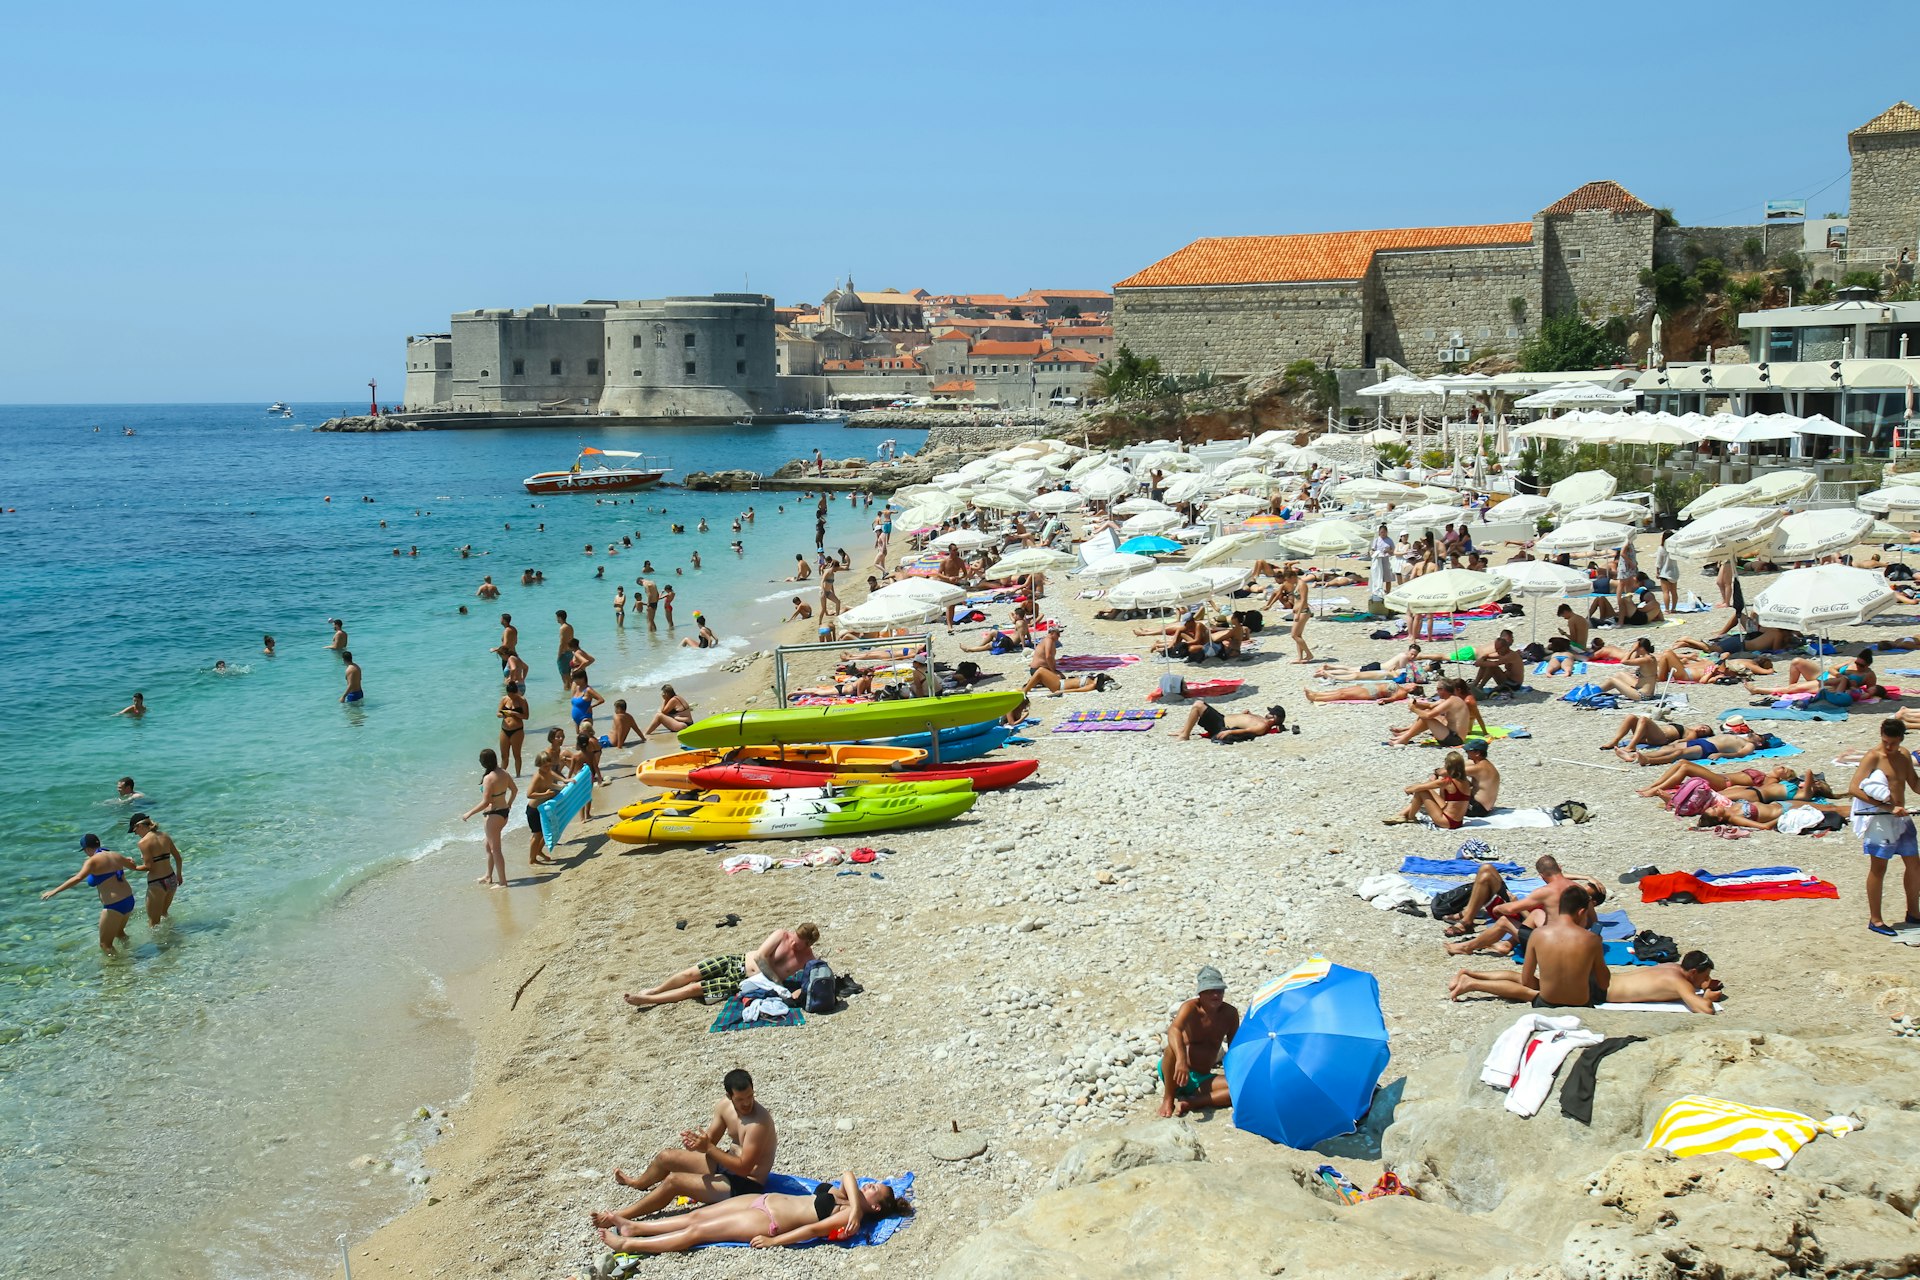 People swimming and sunbathing on the Banje Beach, with the old town of Dubrovnik in the background